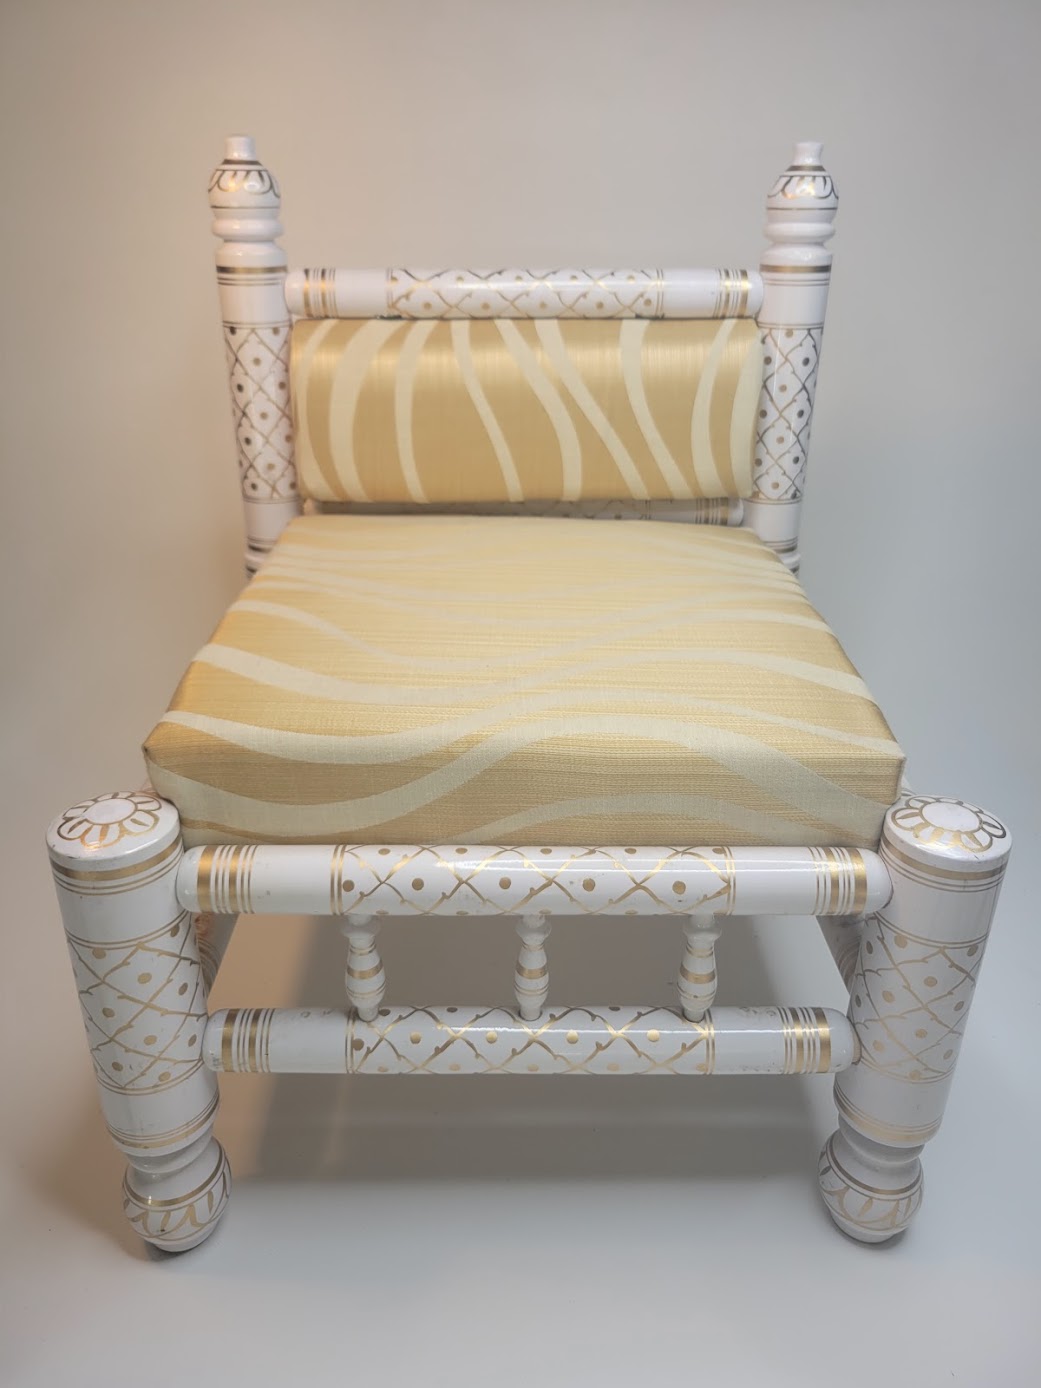 Small White and Gold Sankheda Chair With Gold Cushions